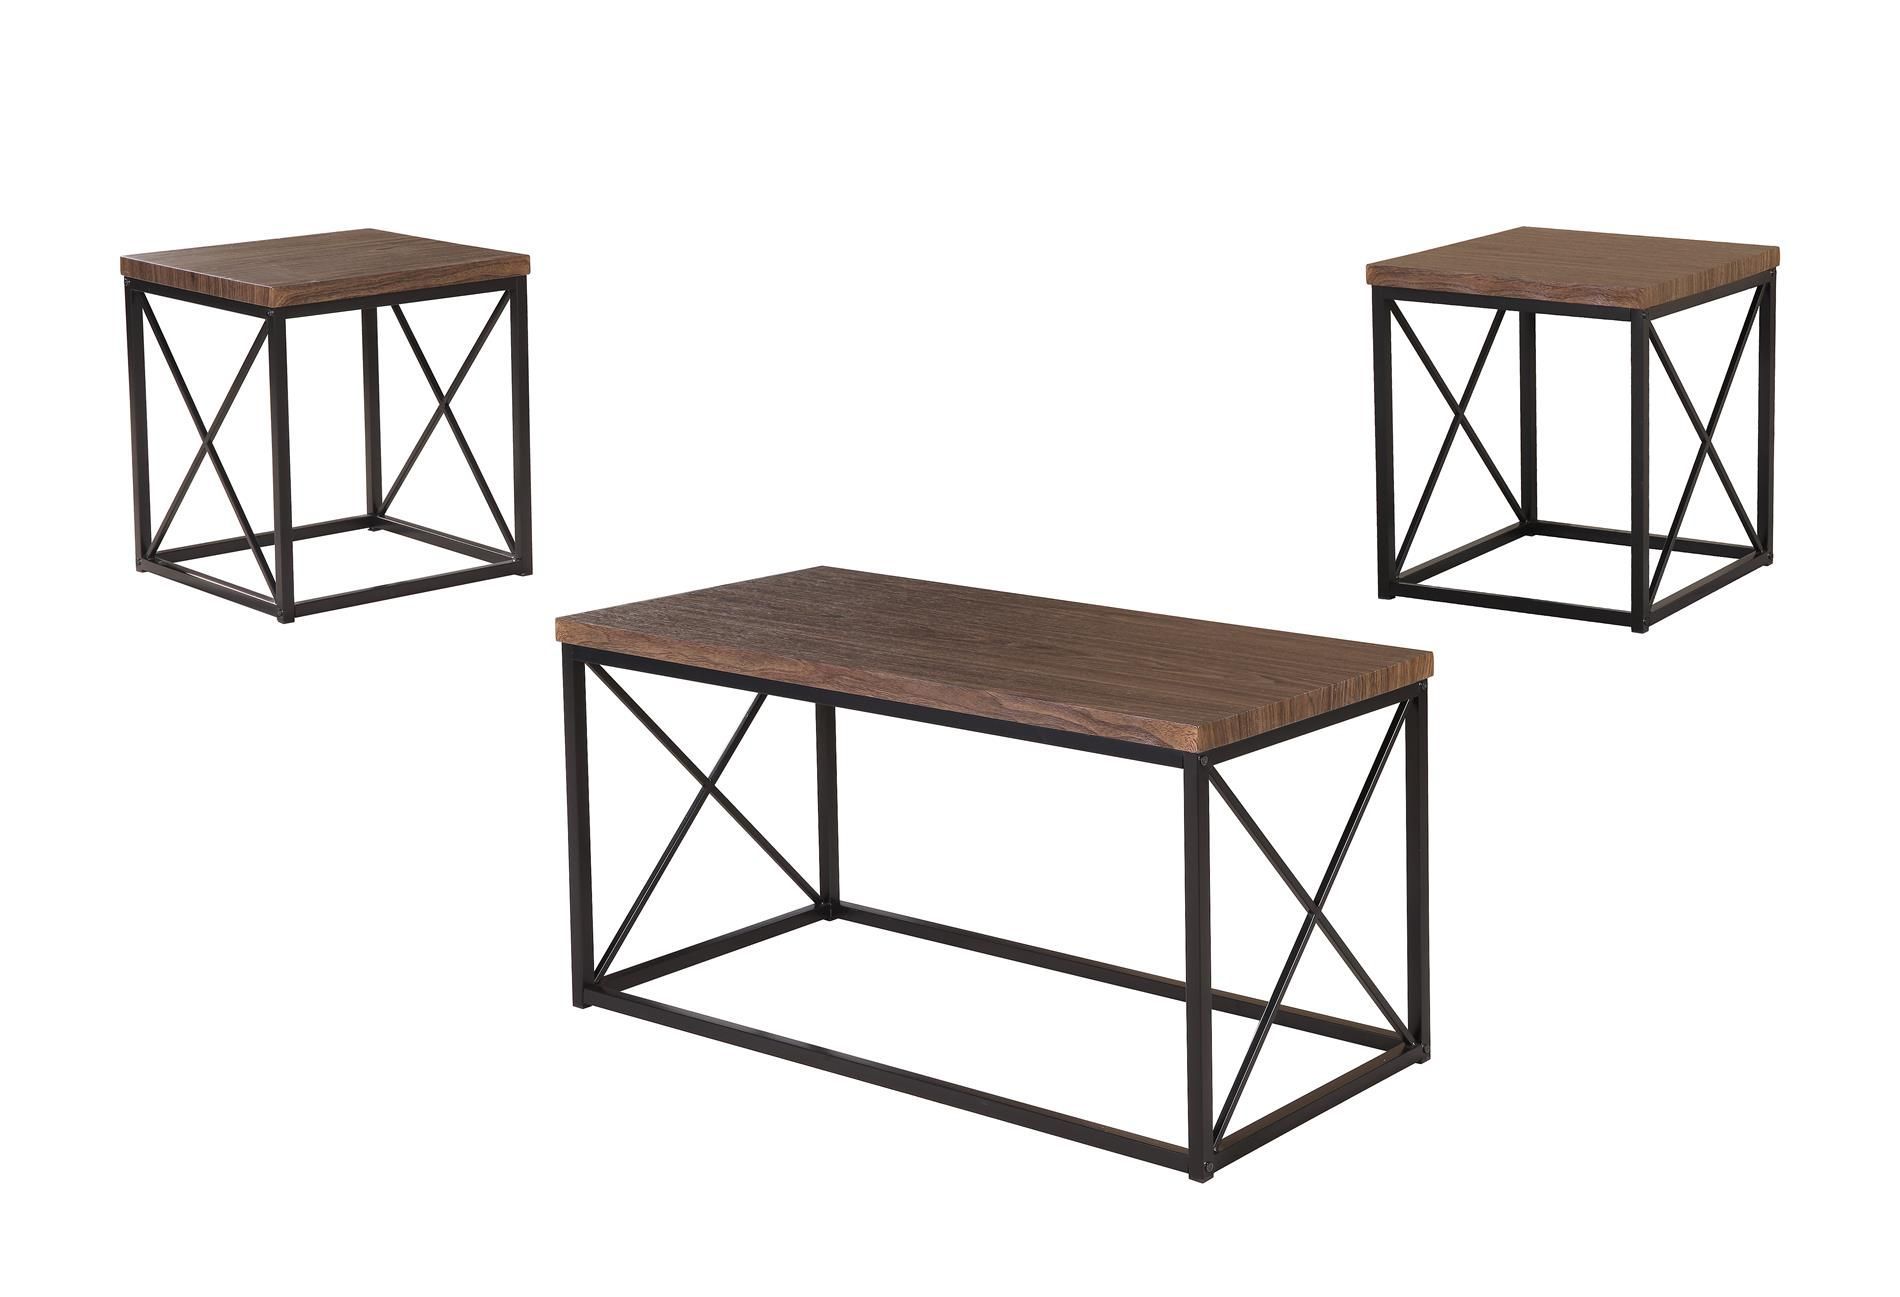 Occasional Coffee Table And End Tables – Stylish And Functional With Occasional Coffee Tables (View 19 of 20)